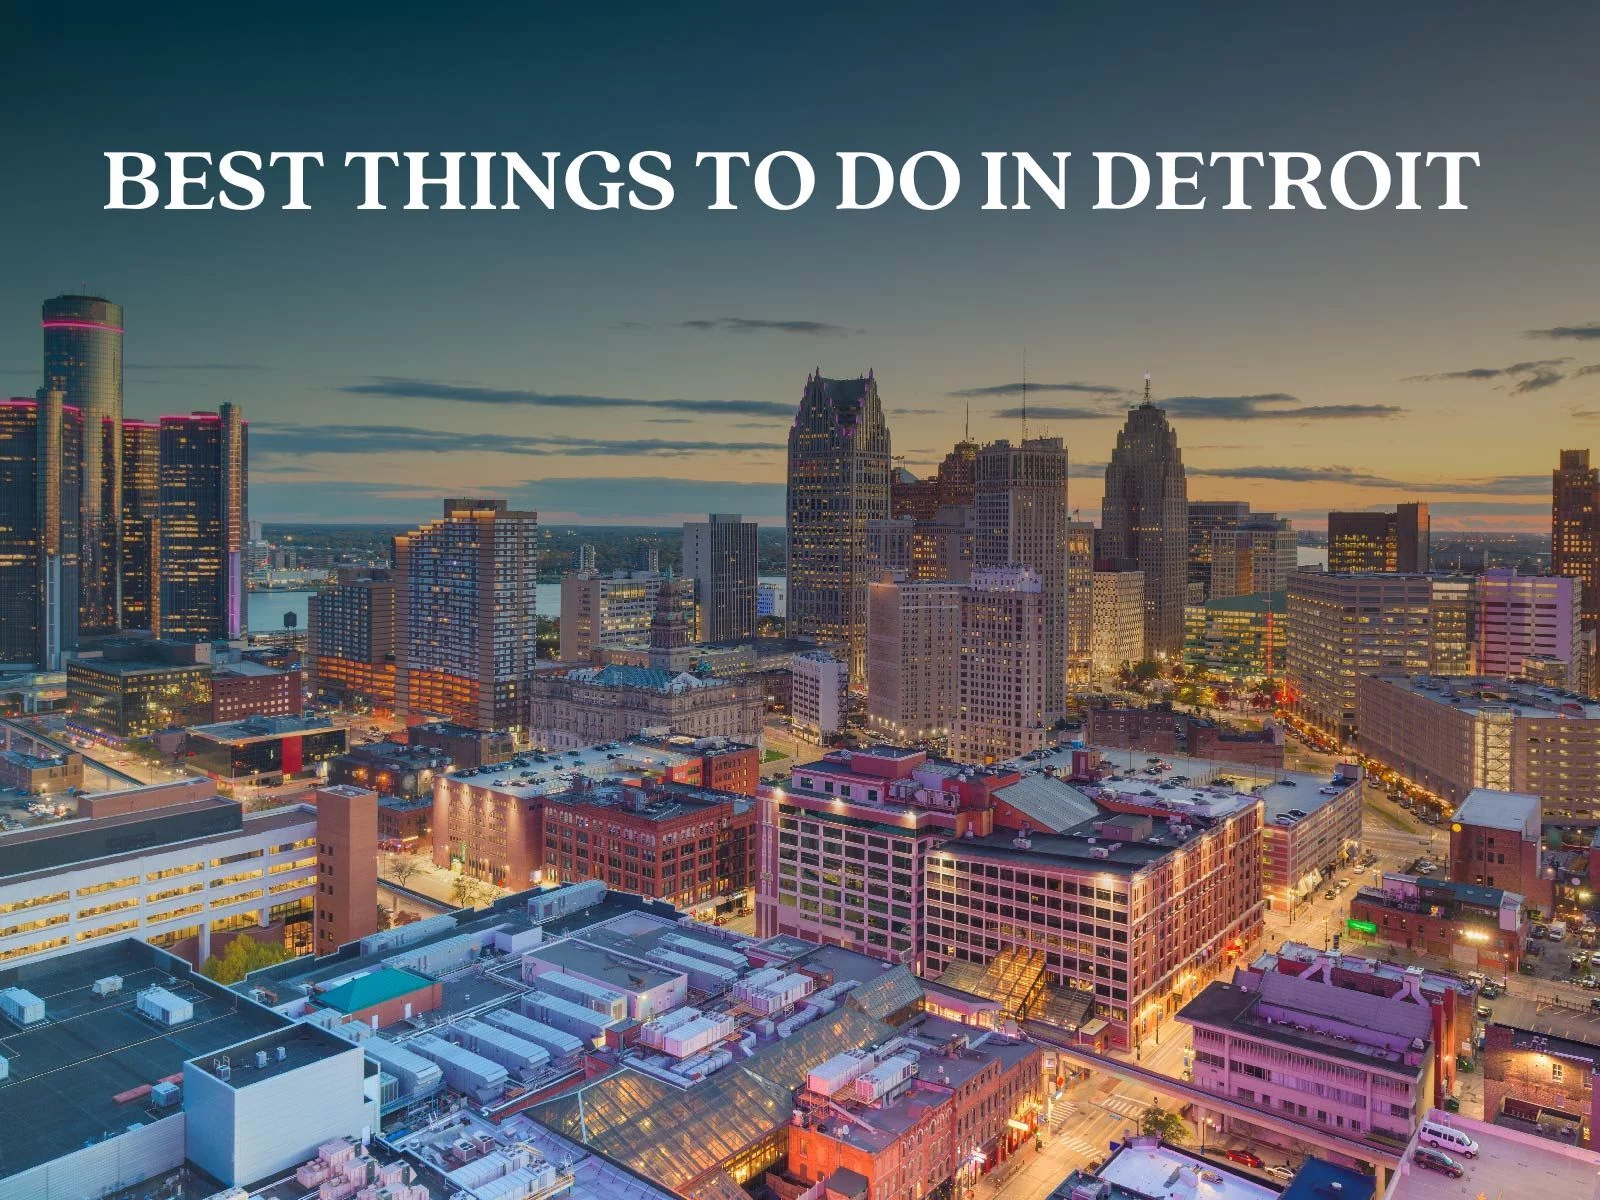 Best Things to do in Detroit